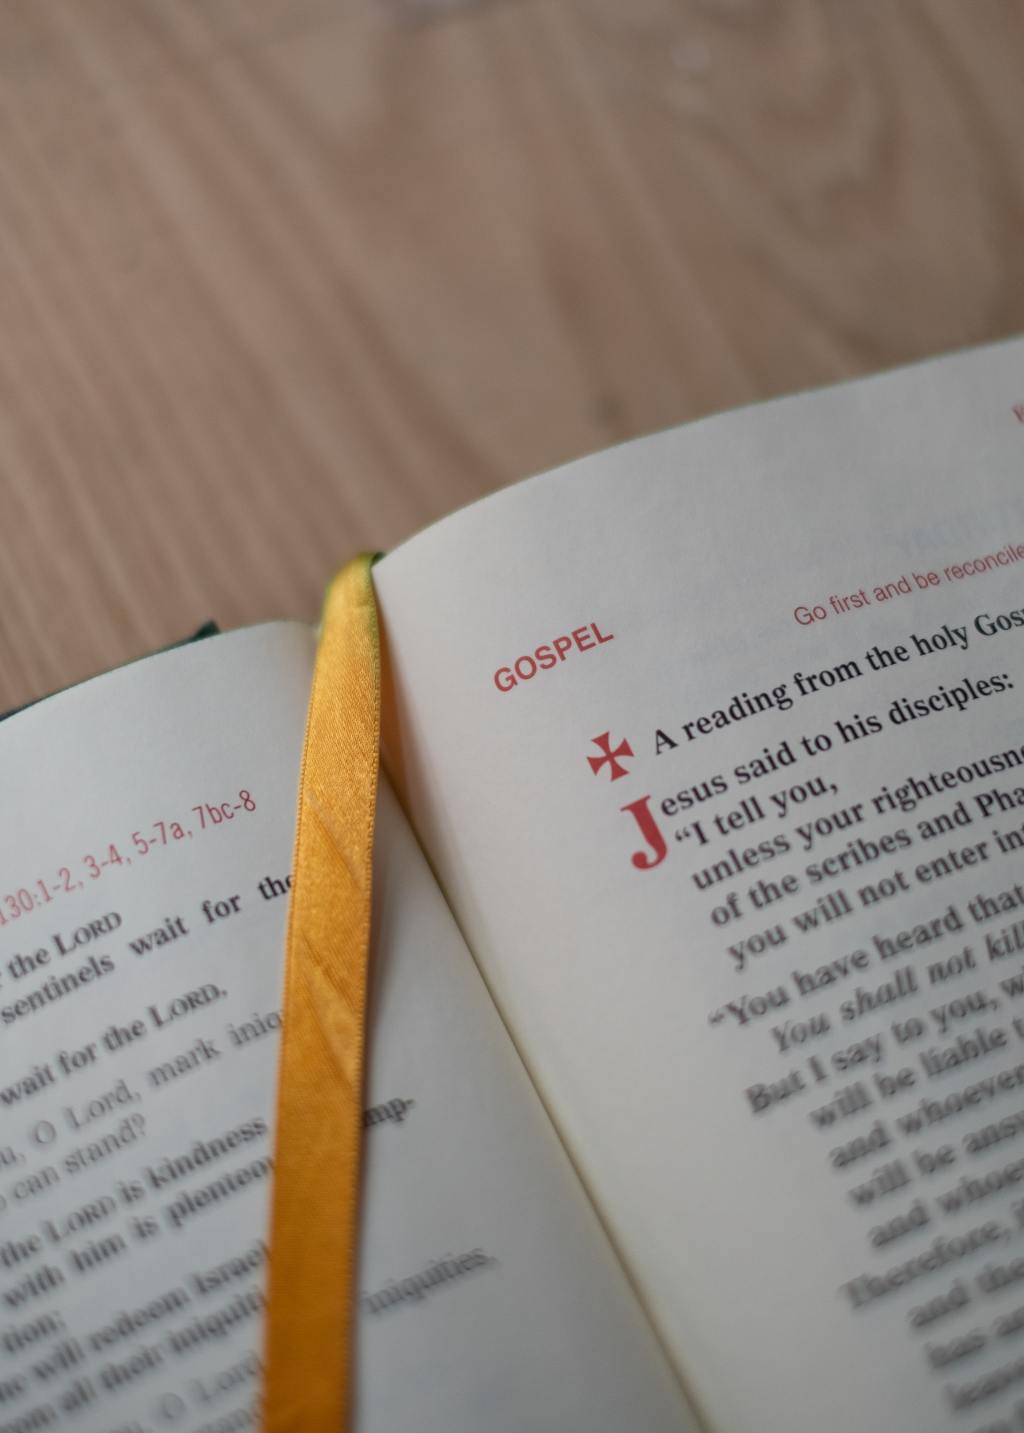 What is the Gospel?